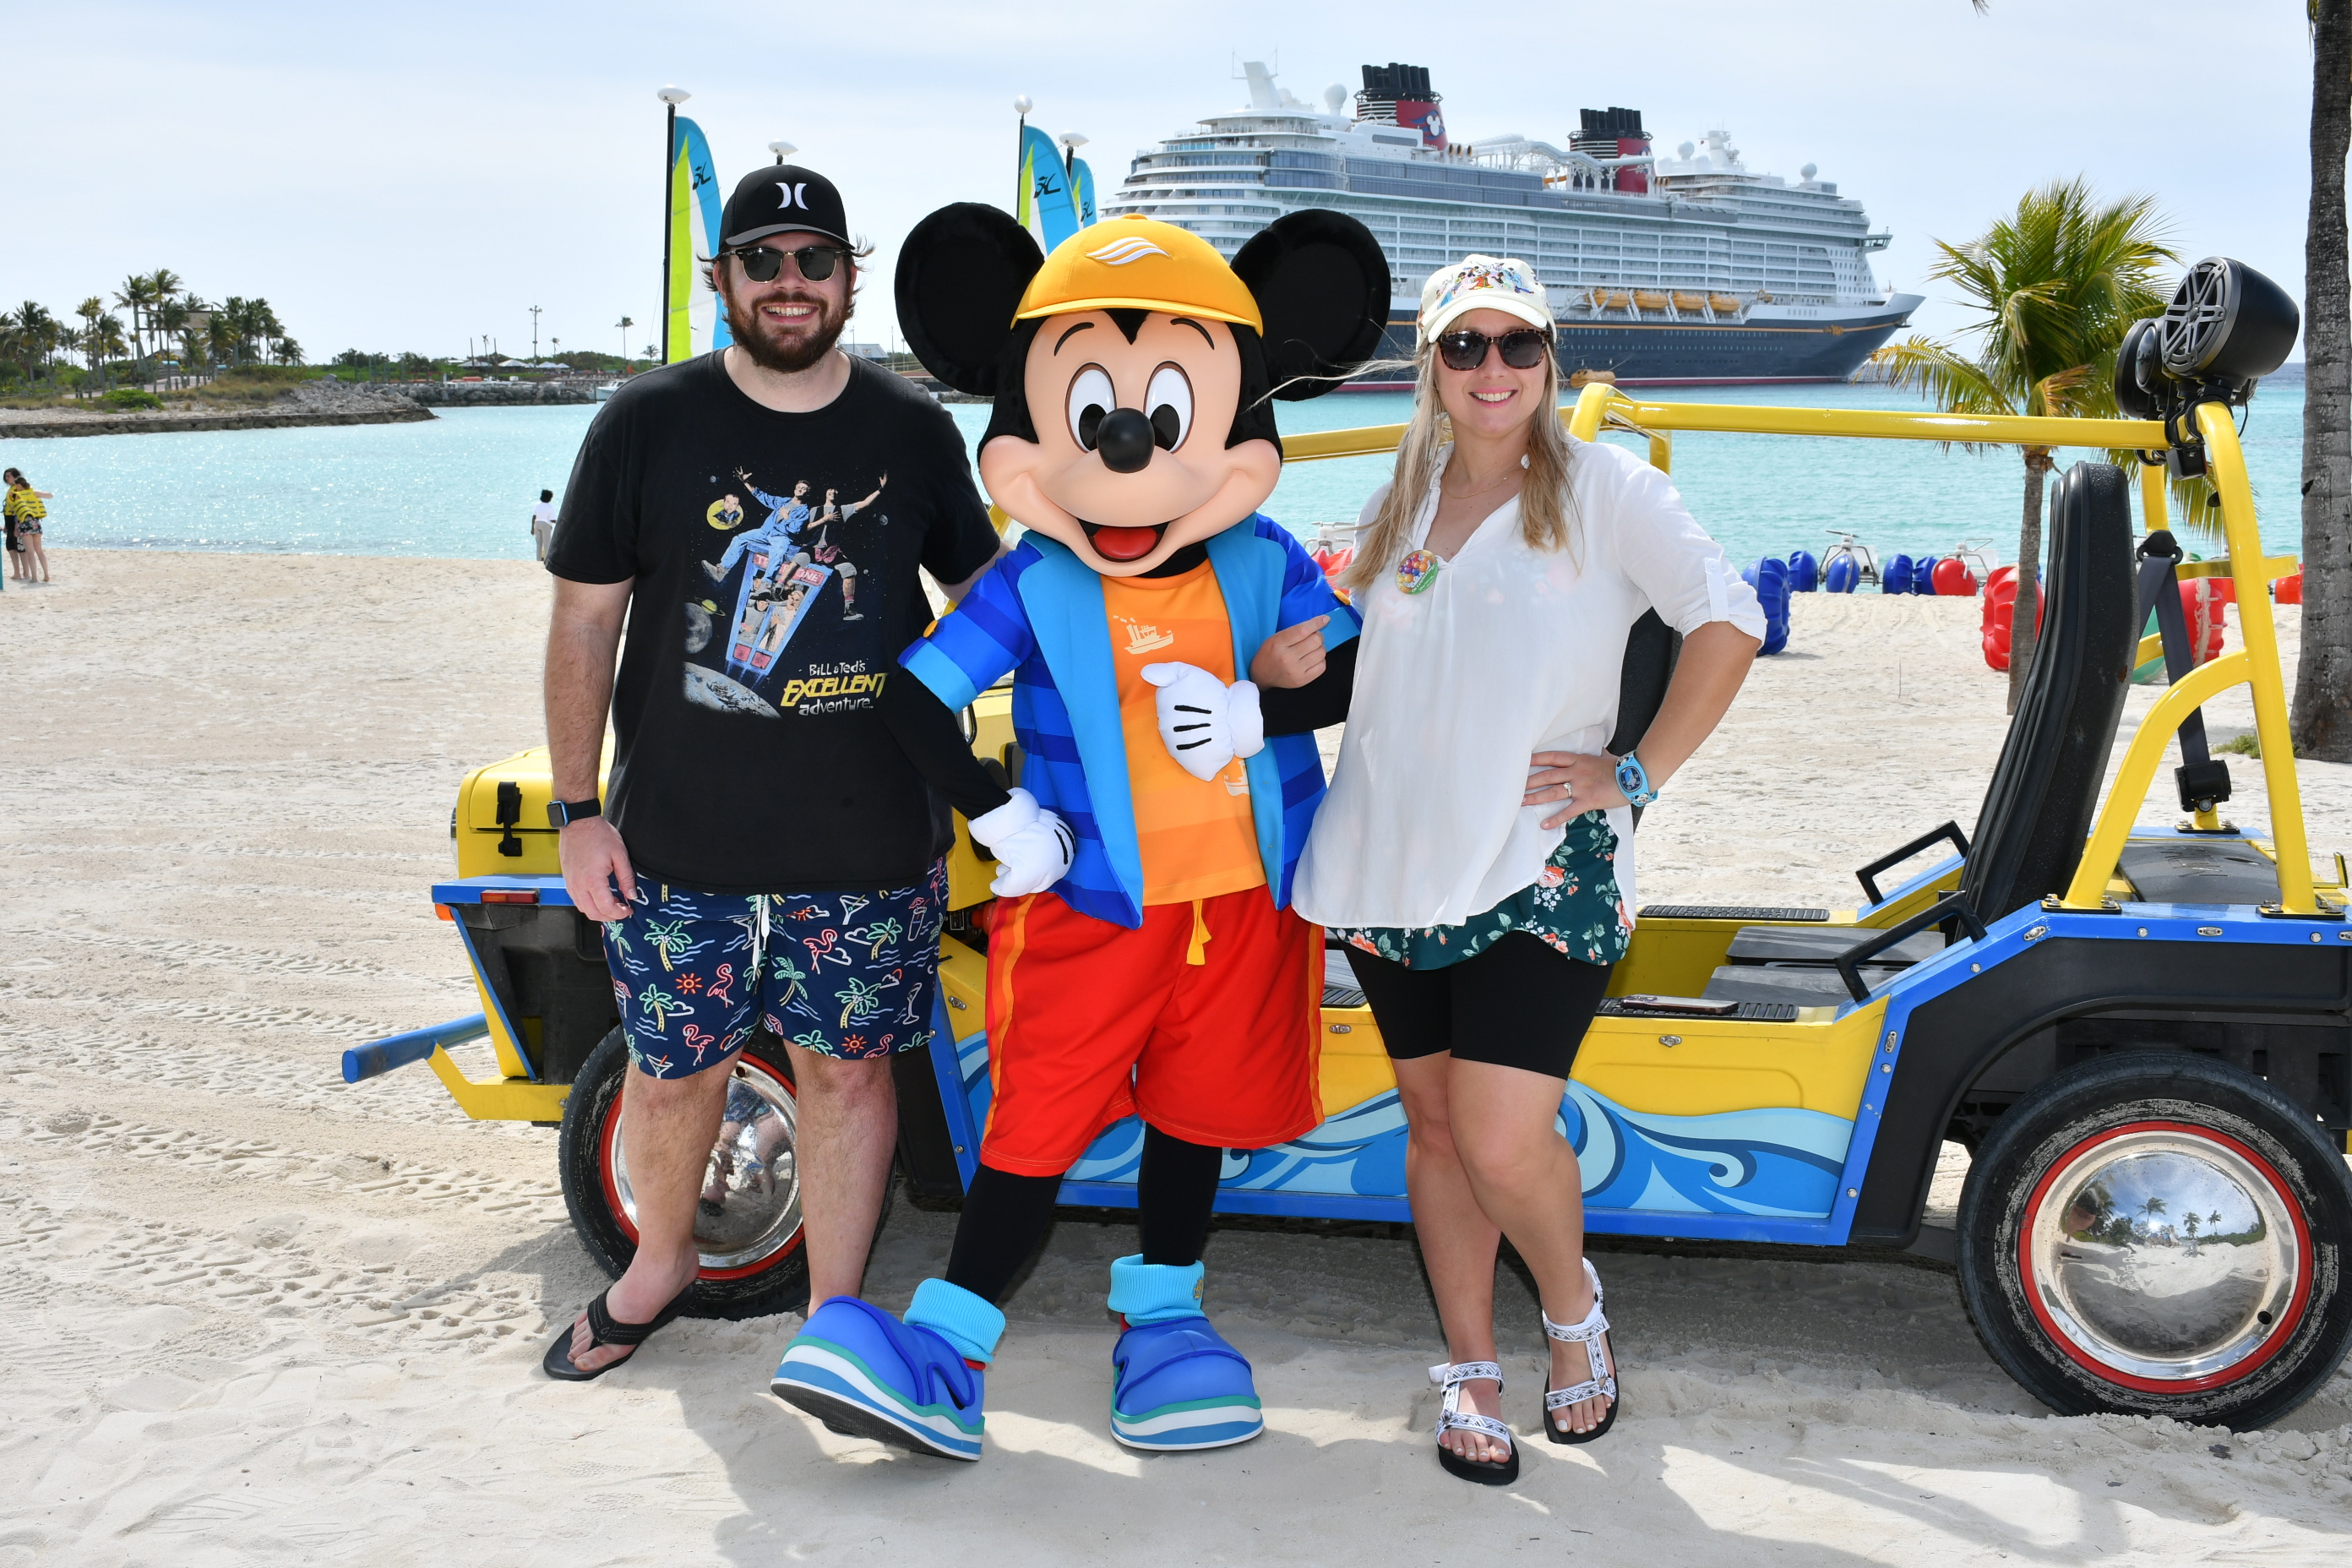 NEW Character Outfits on Disney Cruise Line’s Castaway Cay!